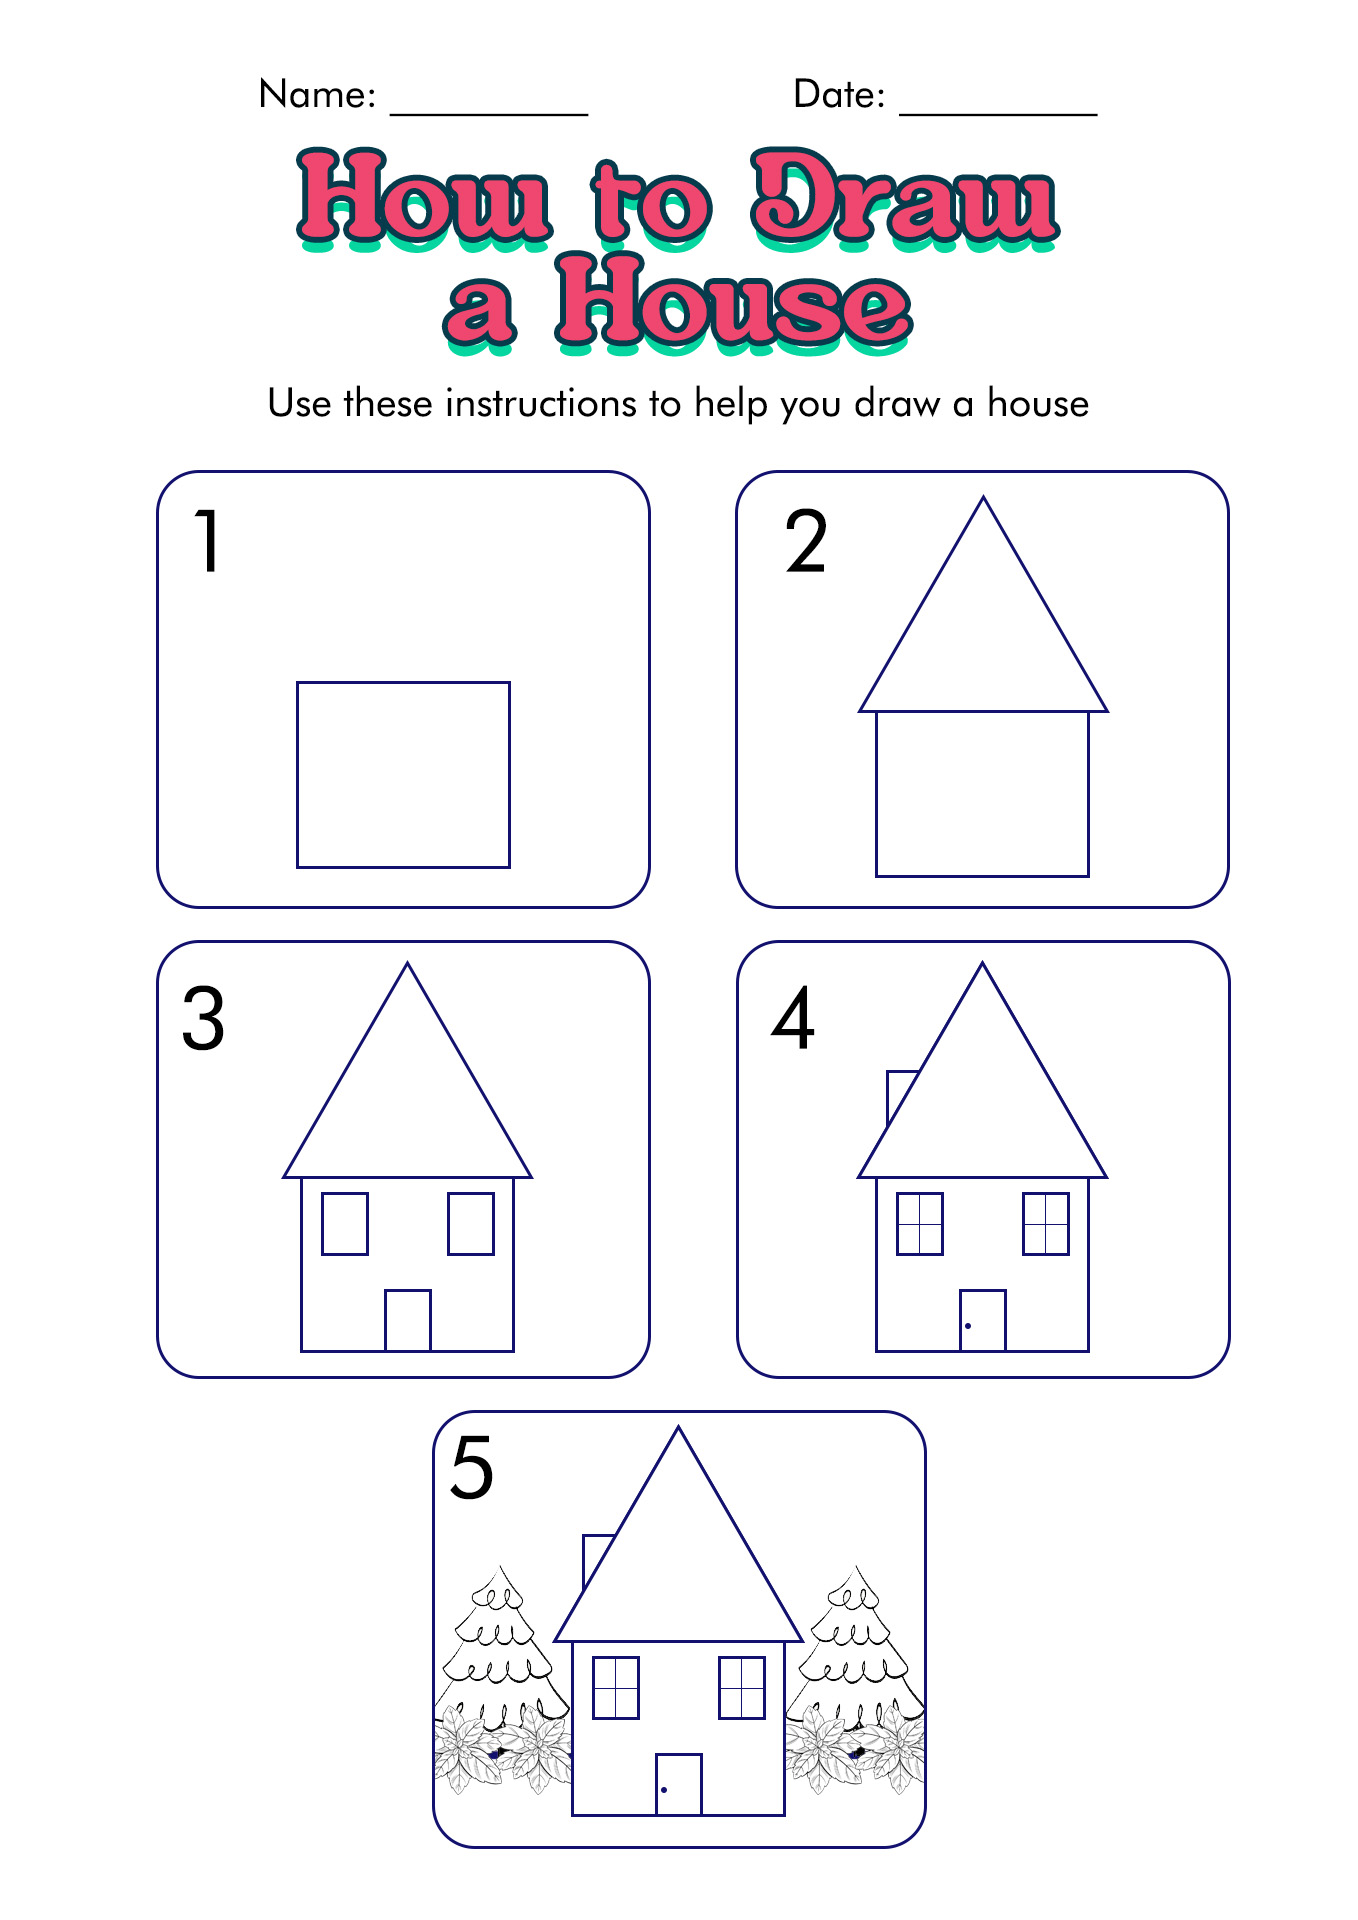 How to Draw Houses Drawing Image